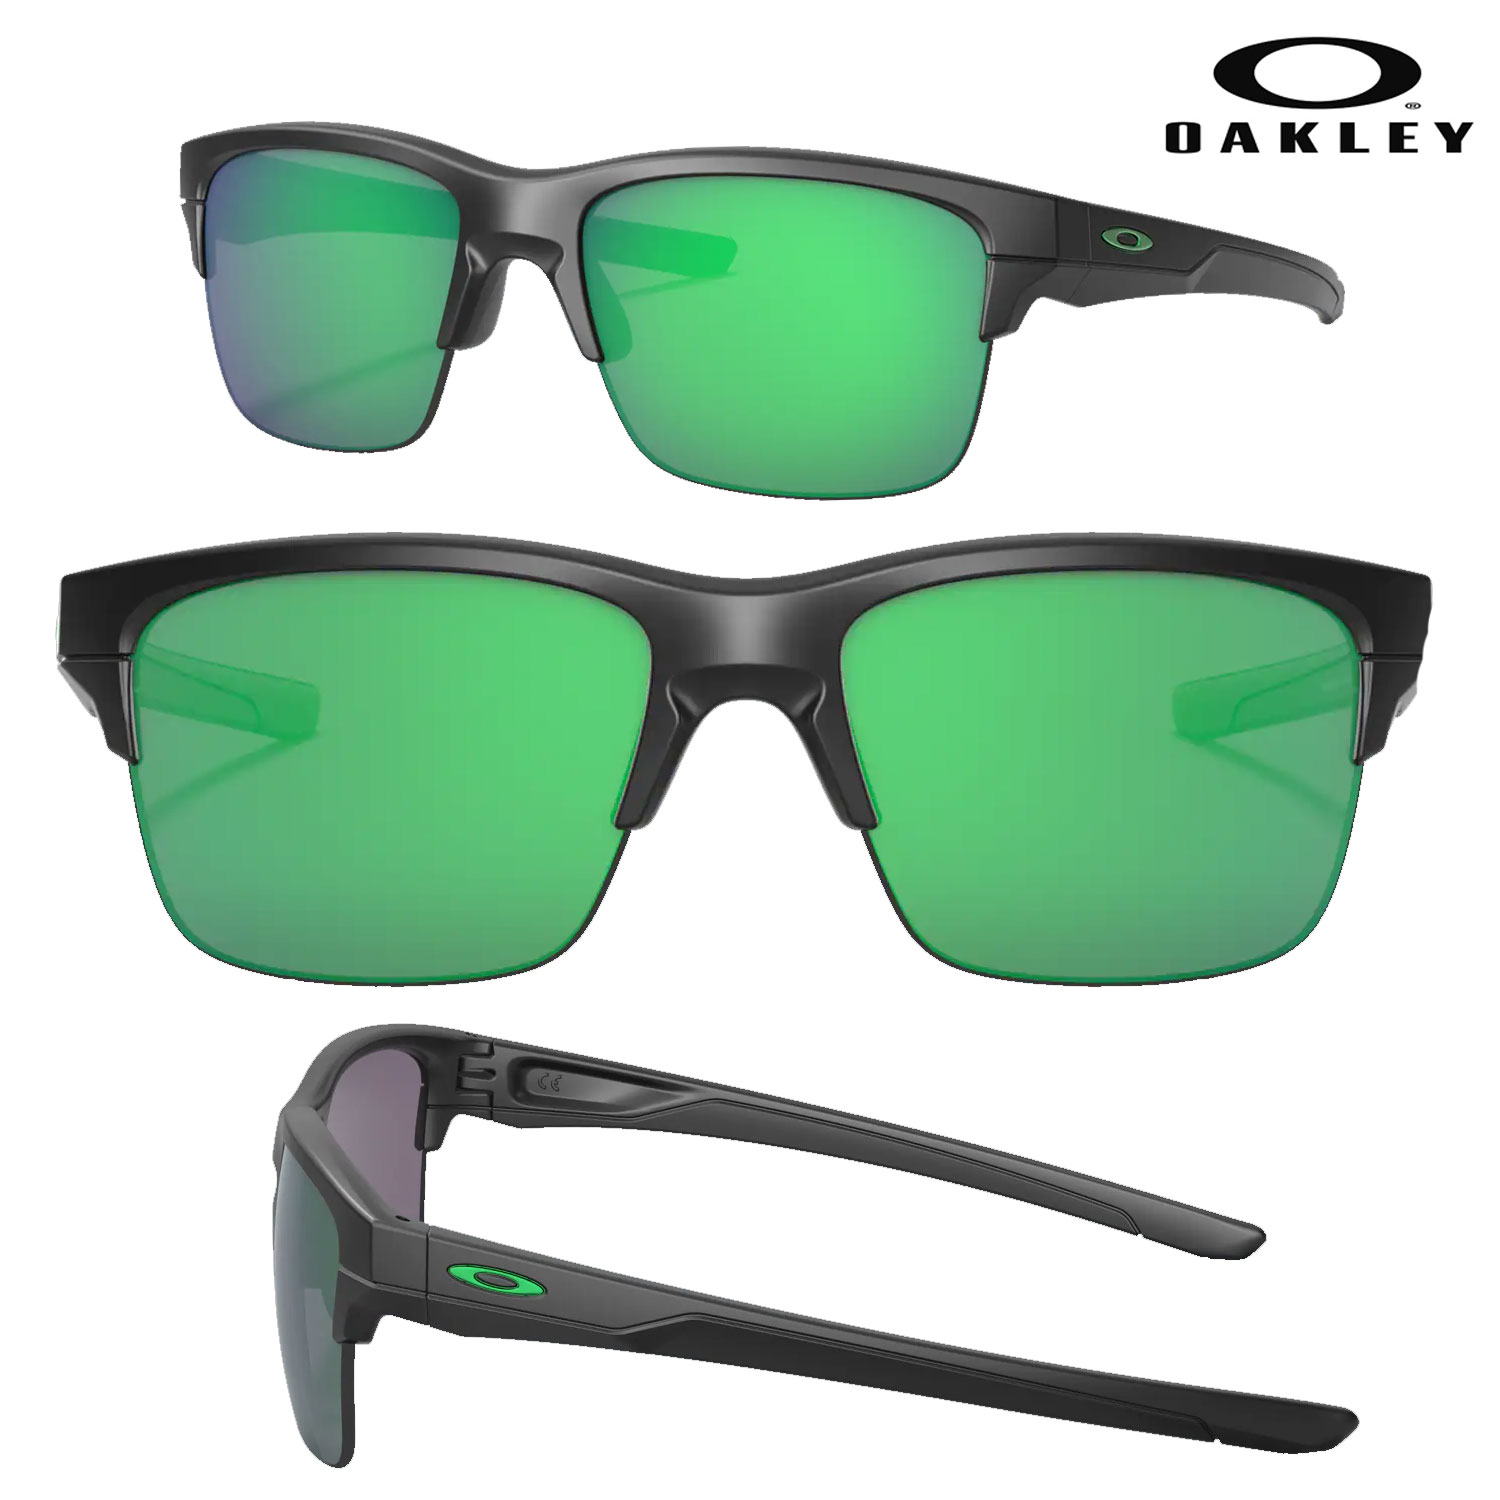 Oakley Thinlink Sunglasses | Cigar Page